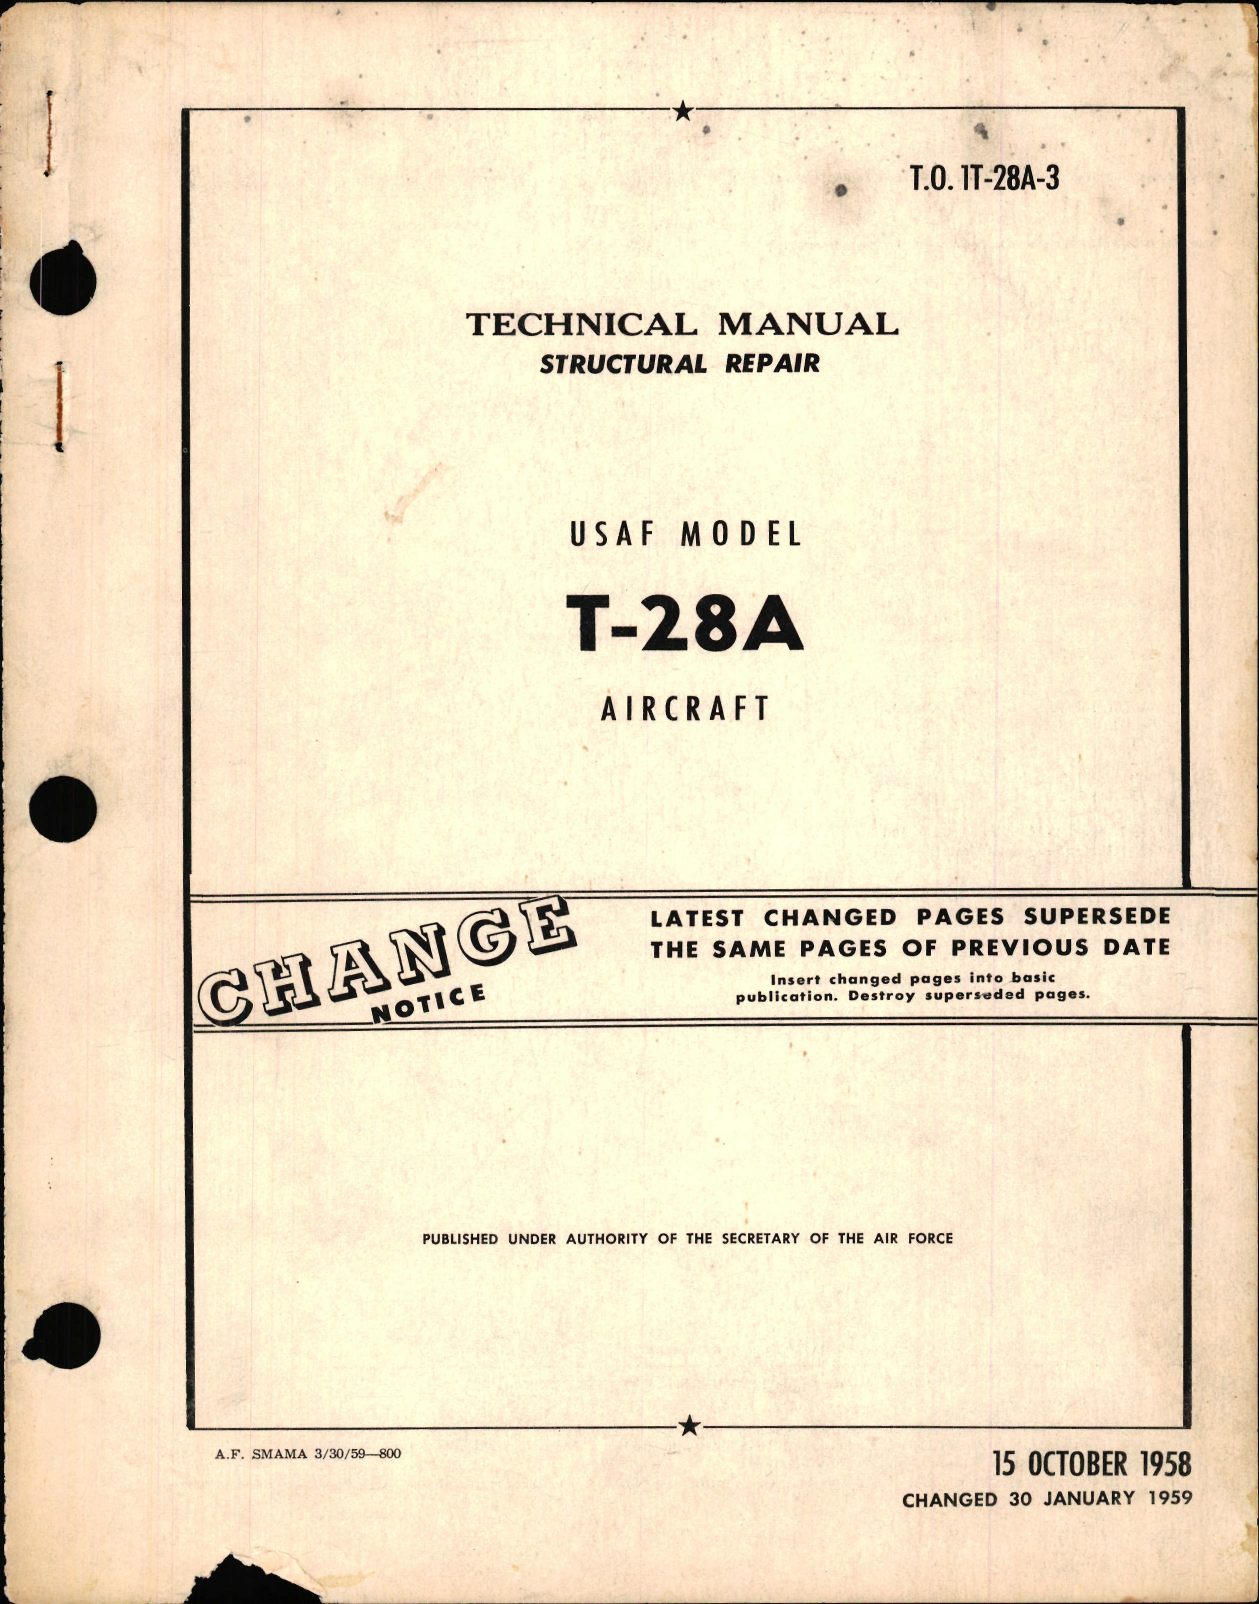 Sample page 1 from AirCorps Library document: Structural Repair Manual for T-28A